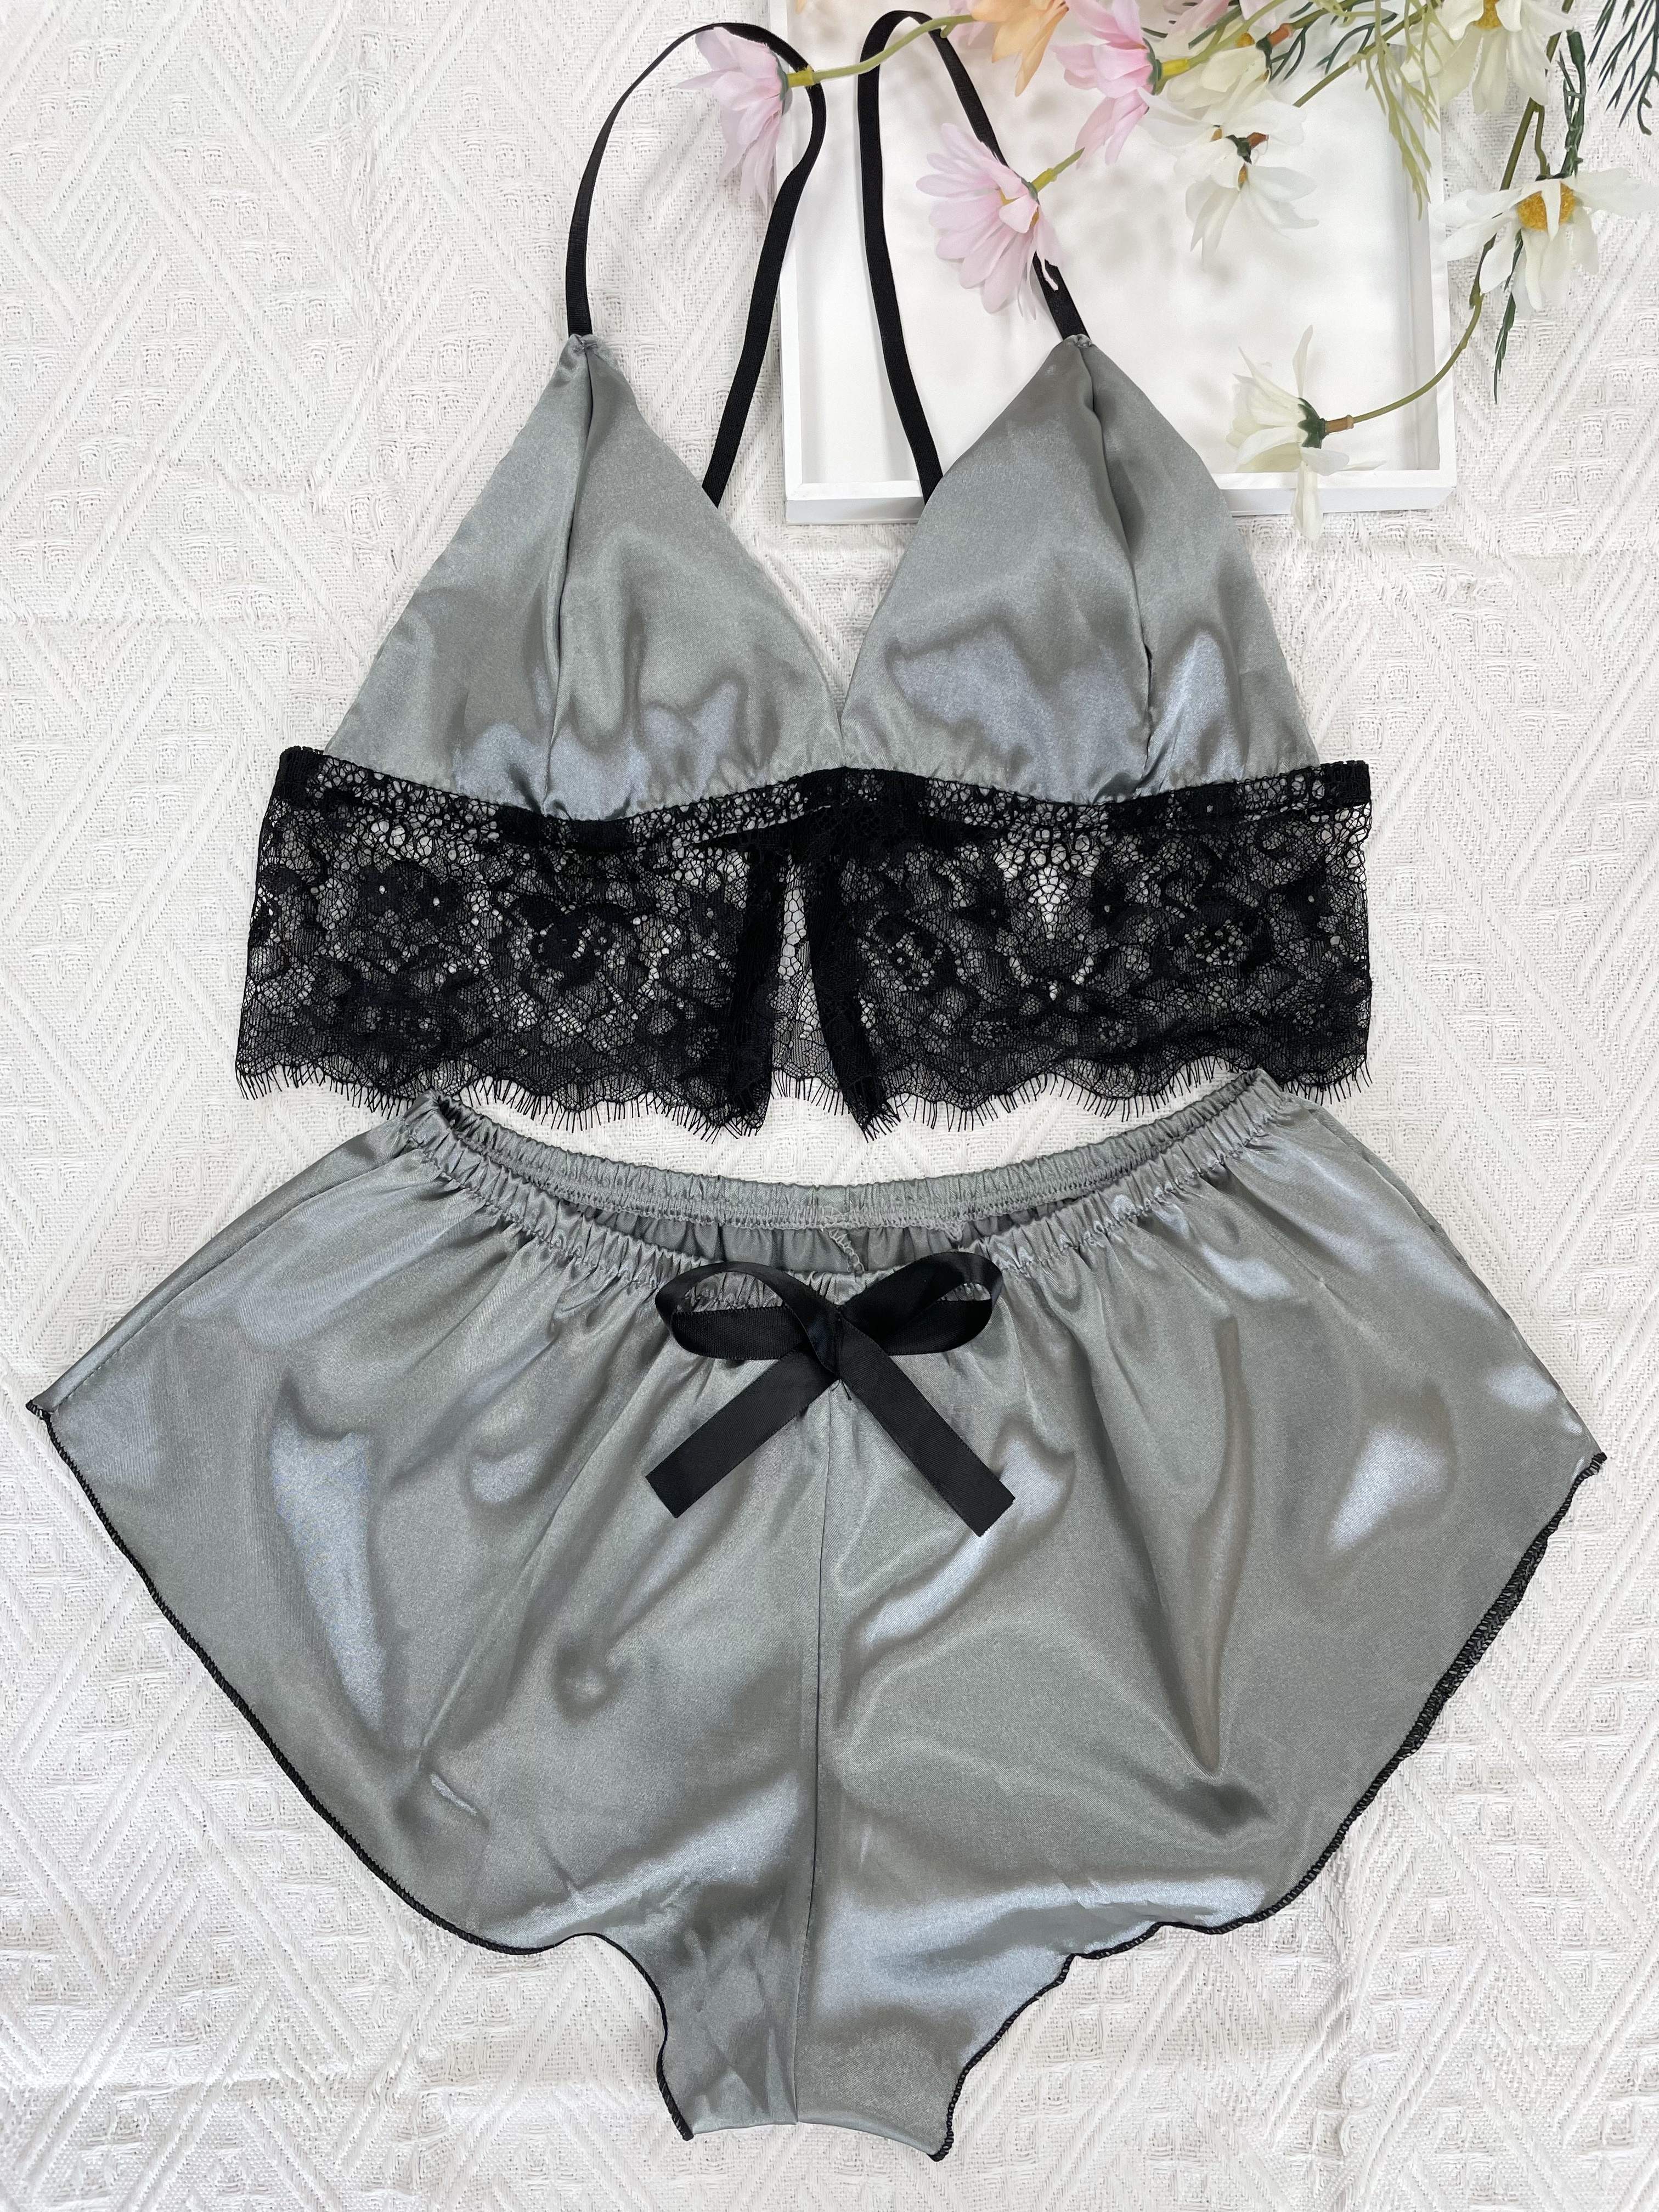 Sexy Contrast Lace Lingerie Set, Triangle Cups Ruffle Bra & Shorts, Women's  Sexy Lingerie & Underwear